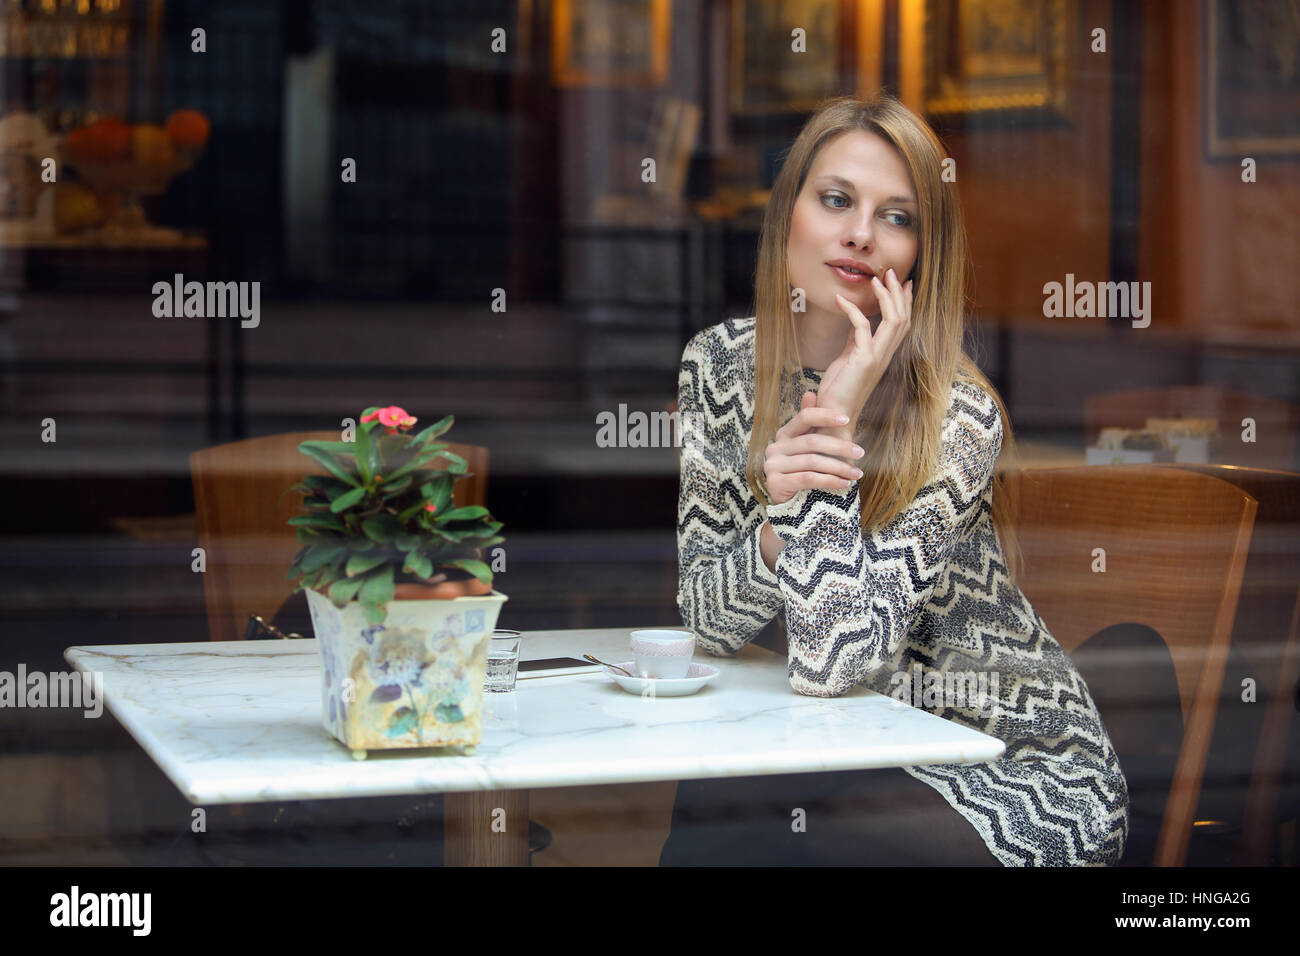 Elegant young woman in a classy cafe. Urban shot Stock Photo